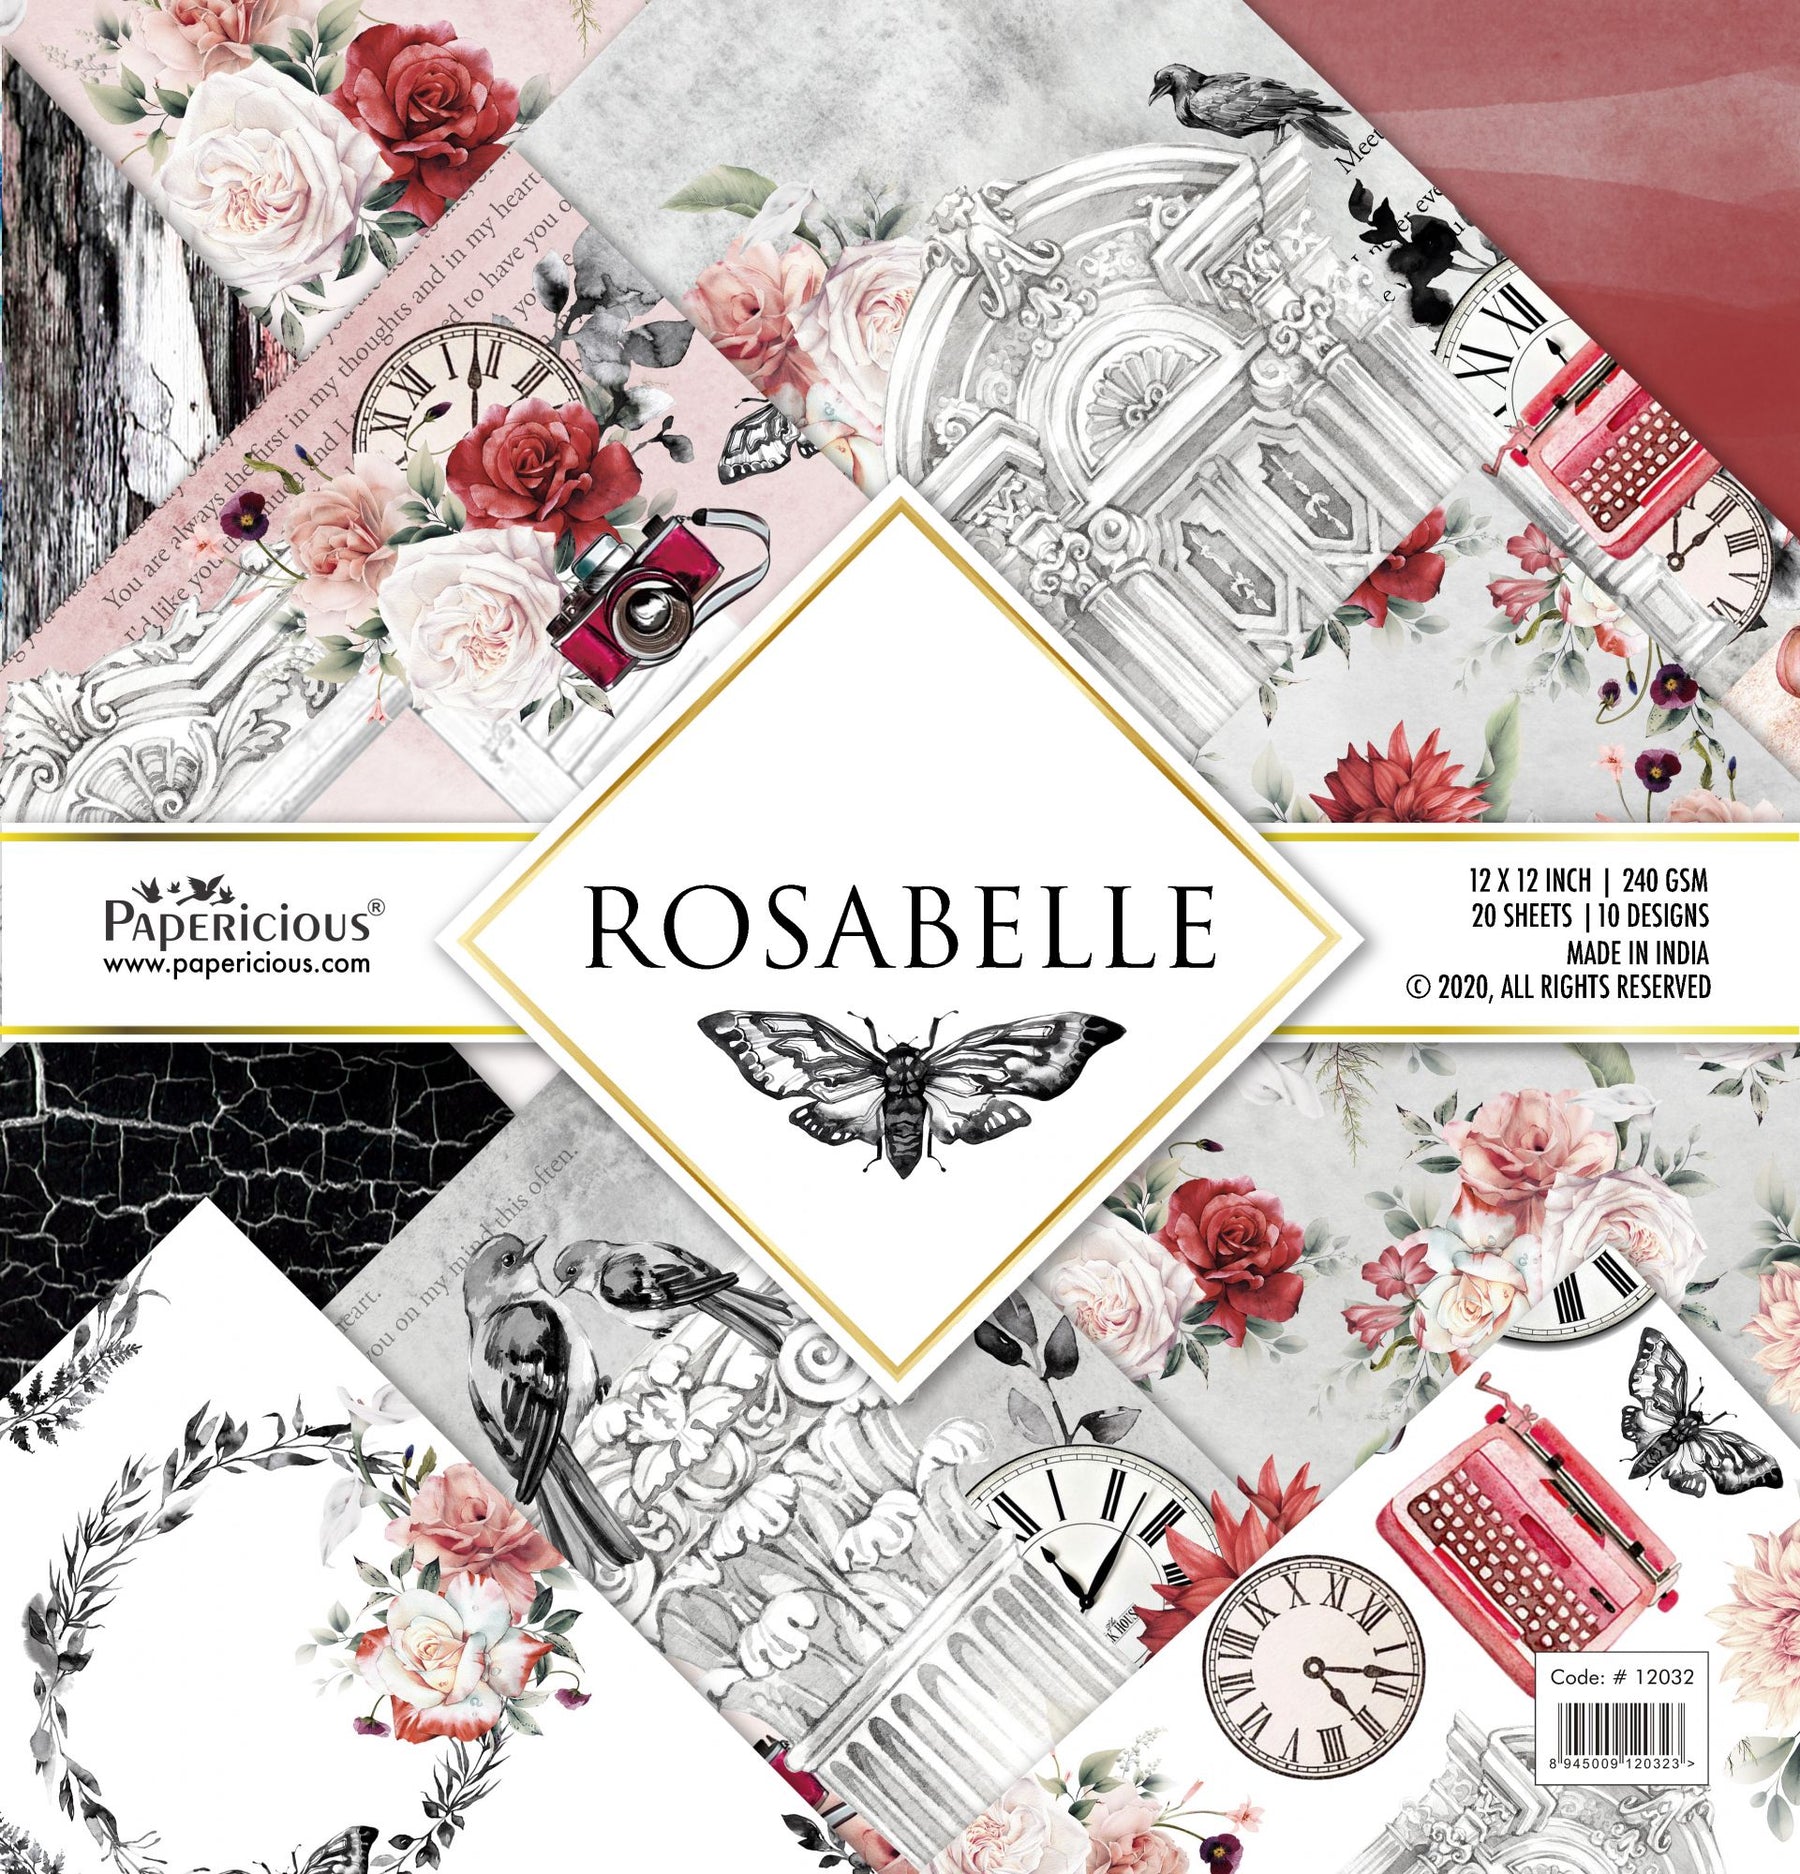 PAPERICIOUS - Rosabelle -  Designer Pattern Printed Scrapbook Papers 12x12 inch  / 20 sheets